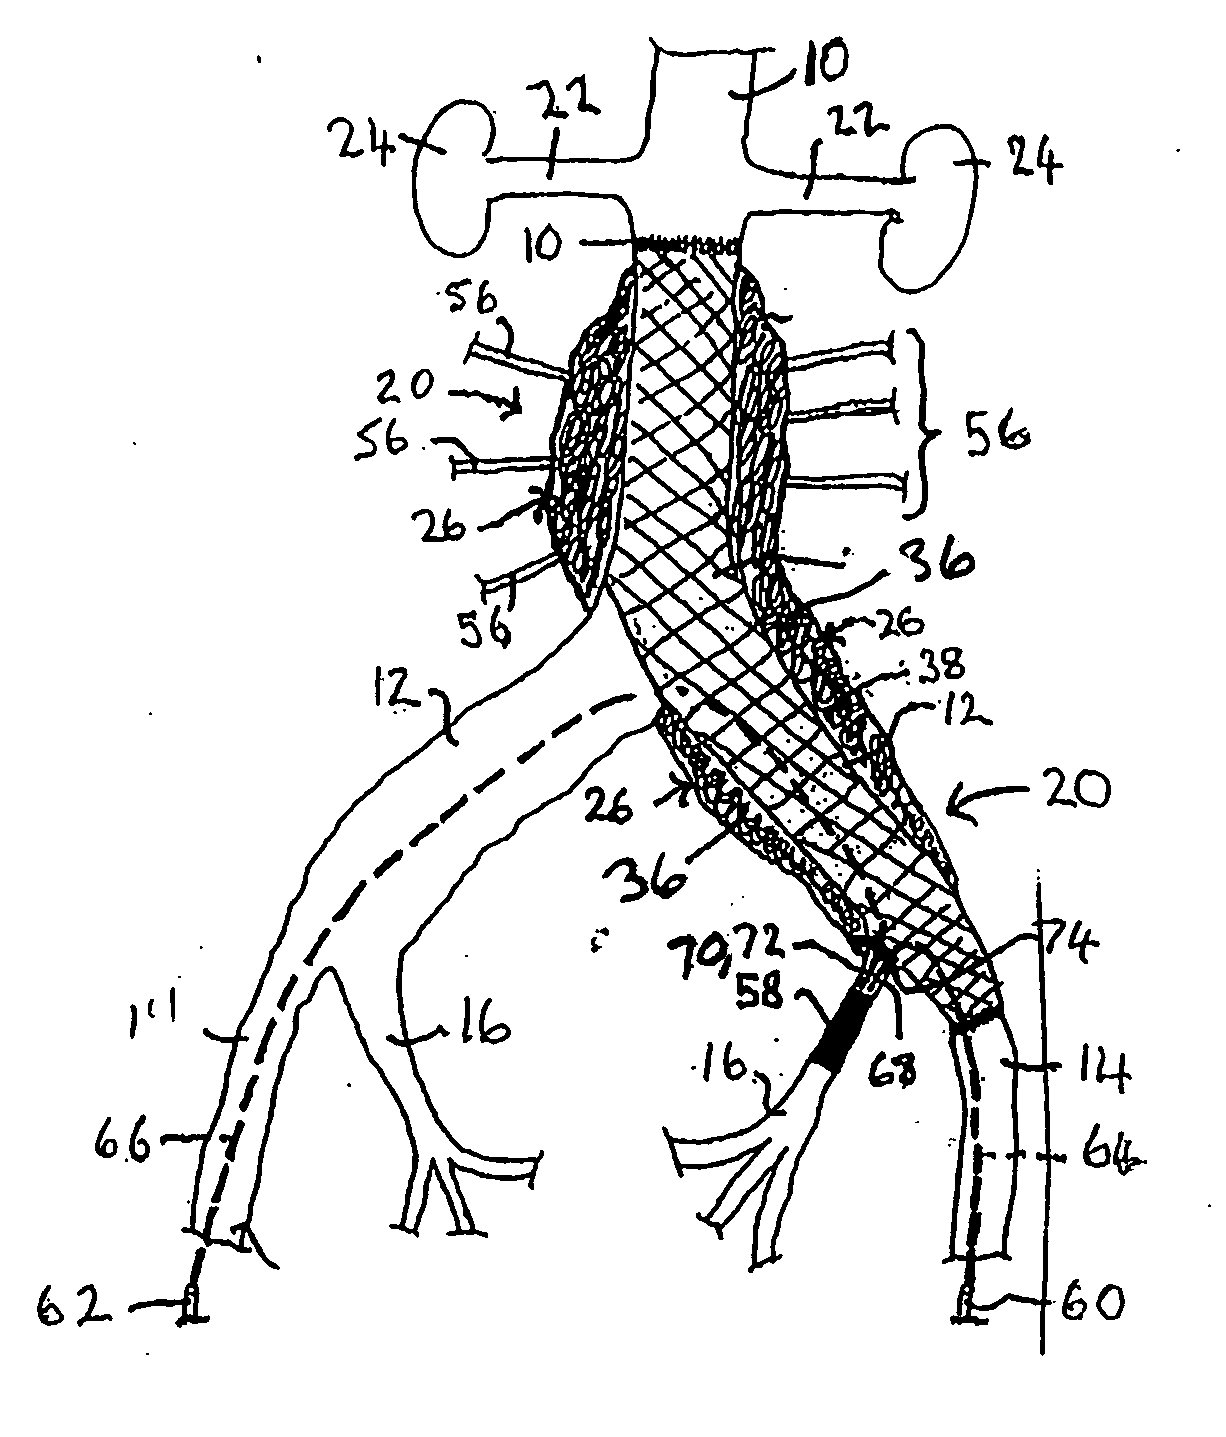 Endovascular treatment devices and methods